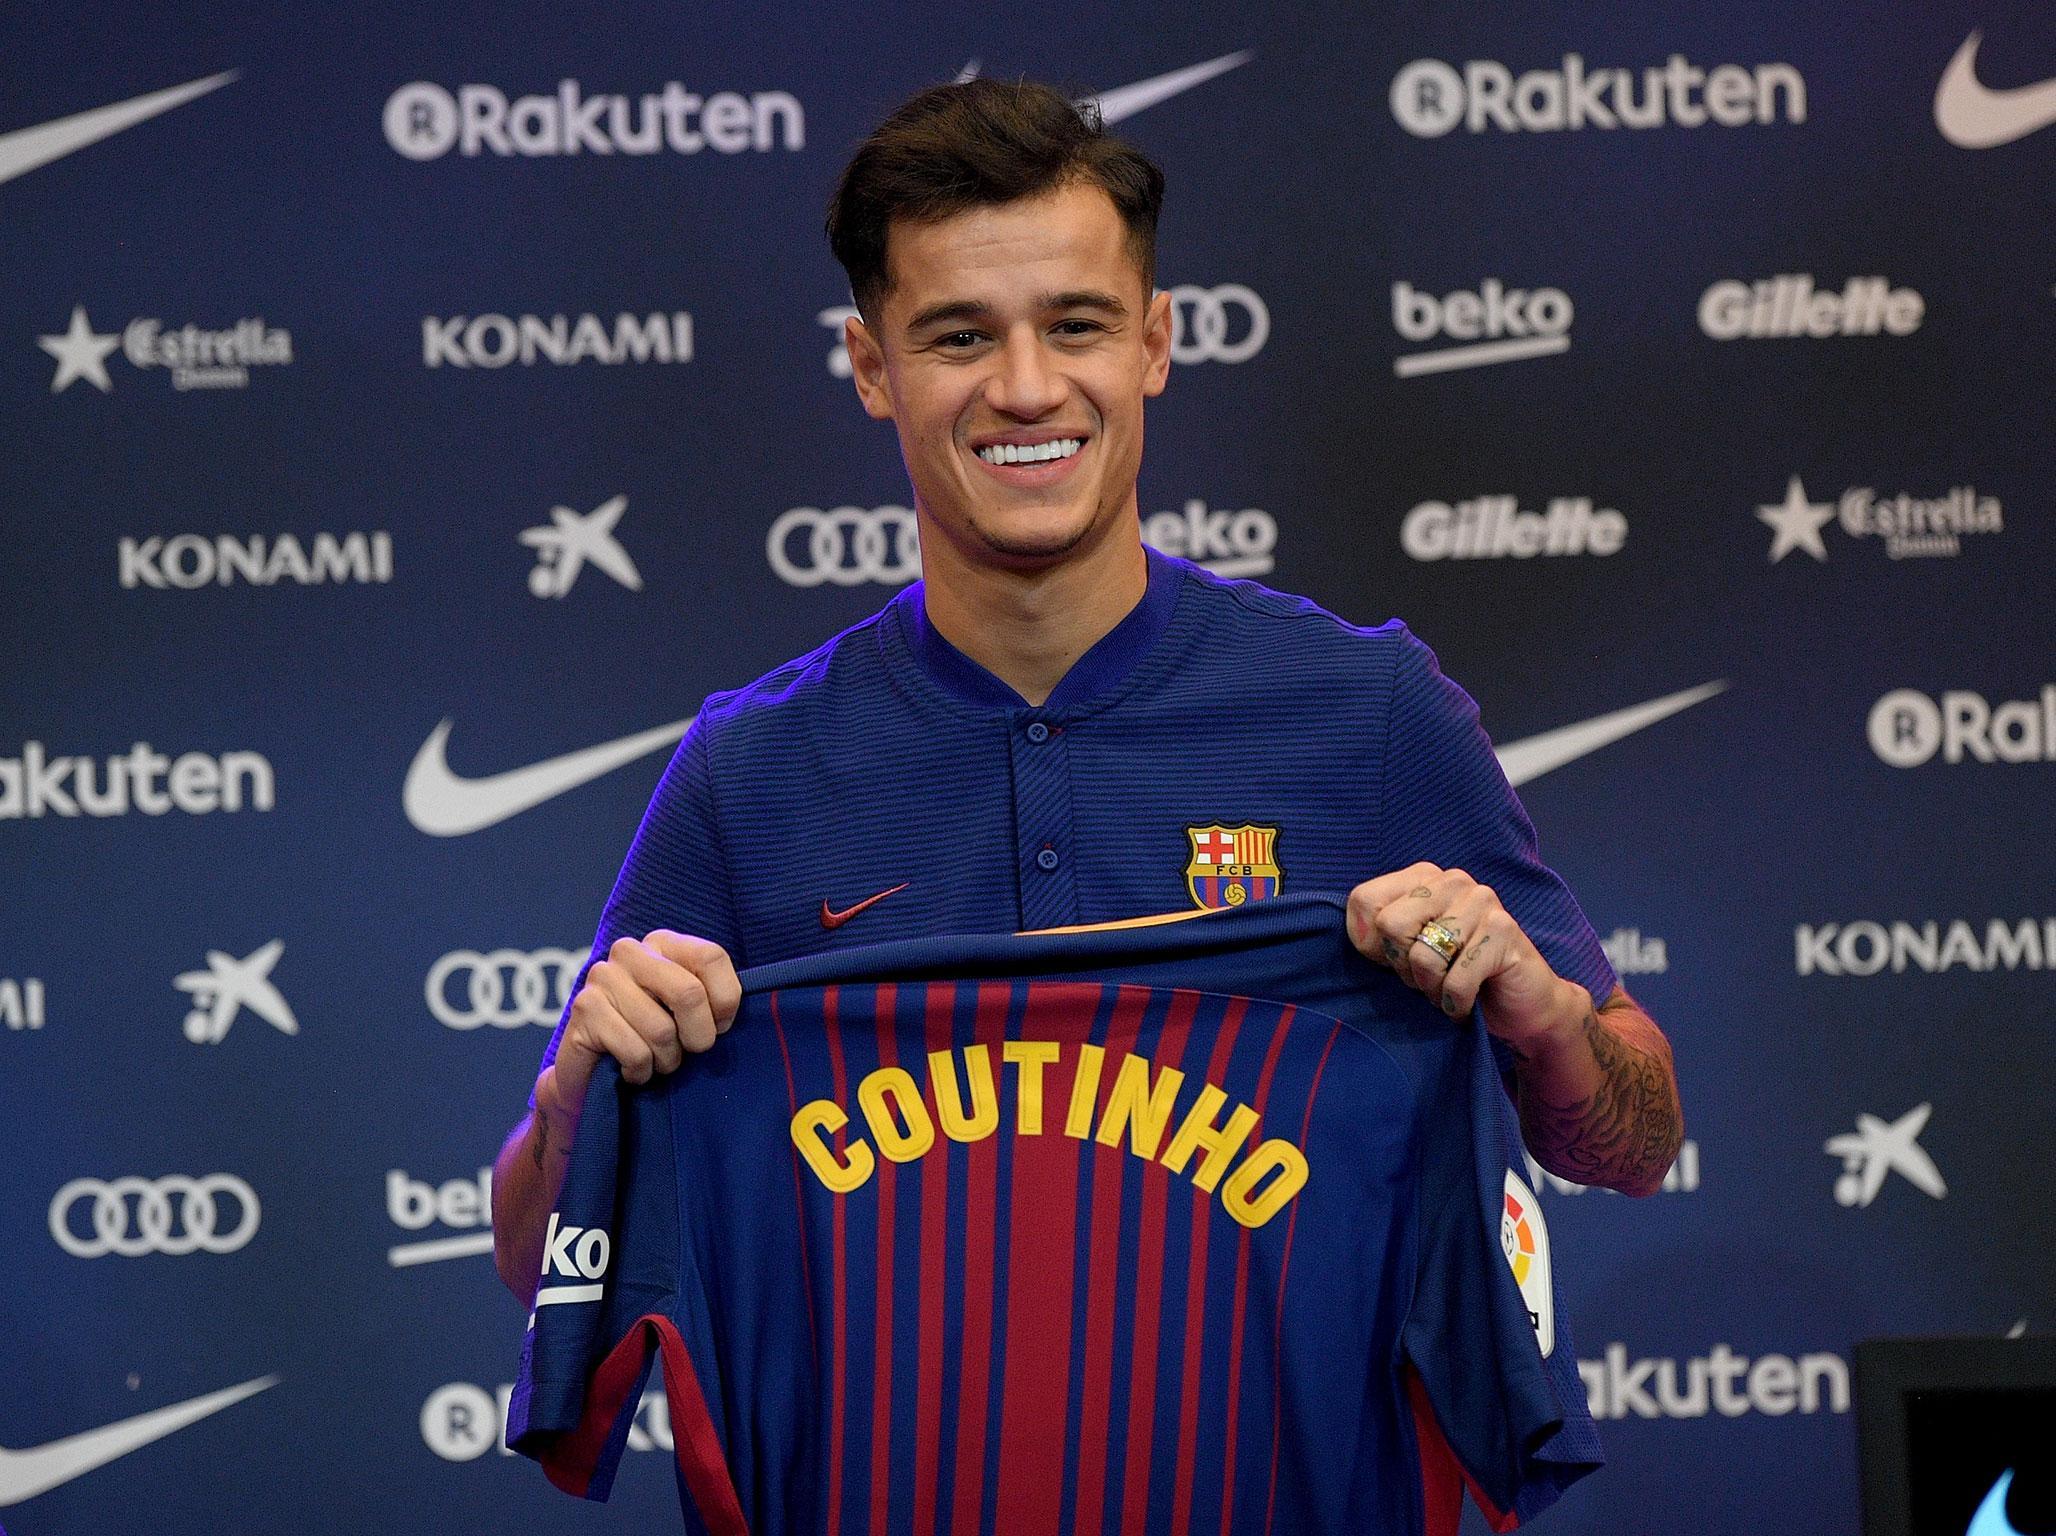 Transfer news, rumours LIVE: Liverpool identify Coutinho replacement, Sanchez to City, Chelsea stall on defender